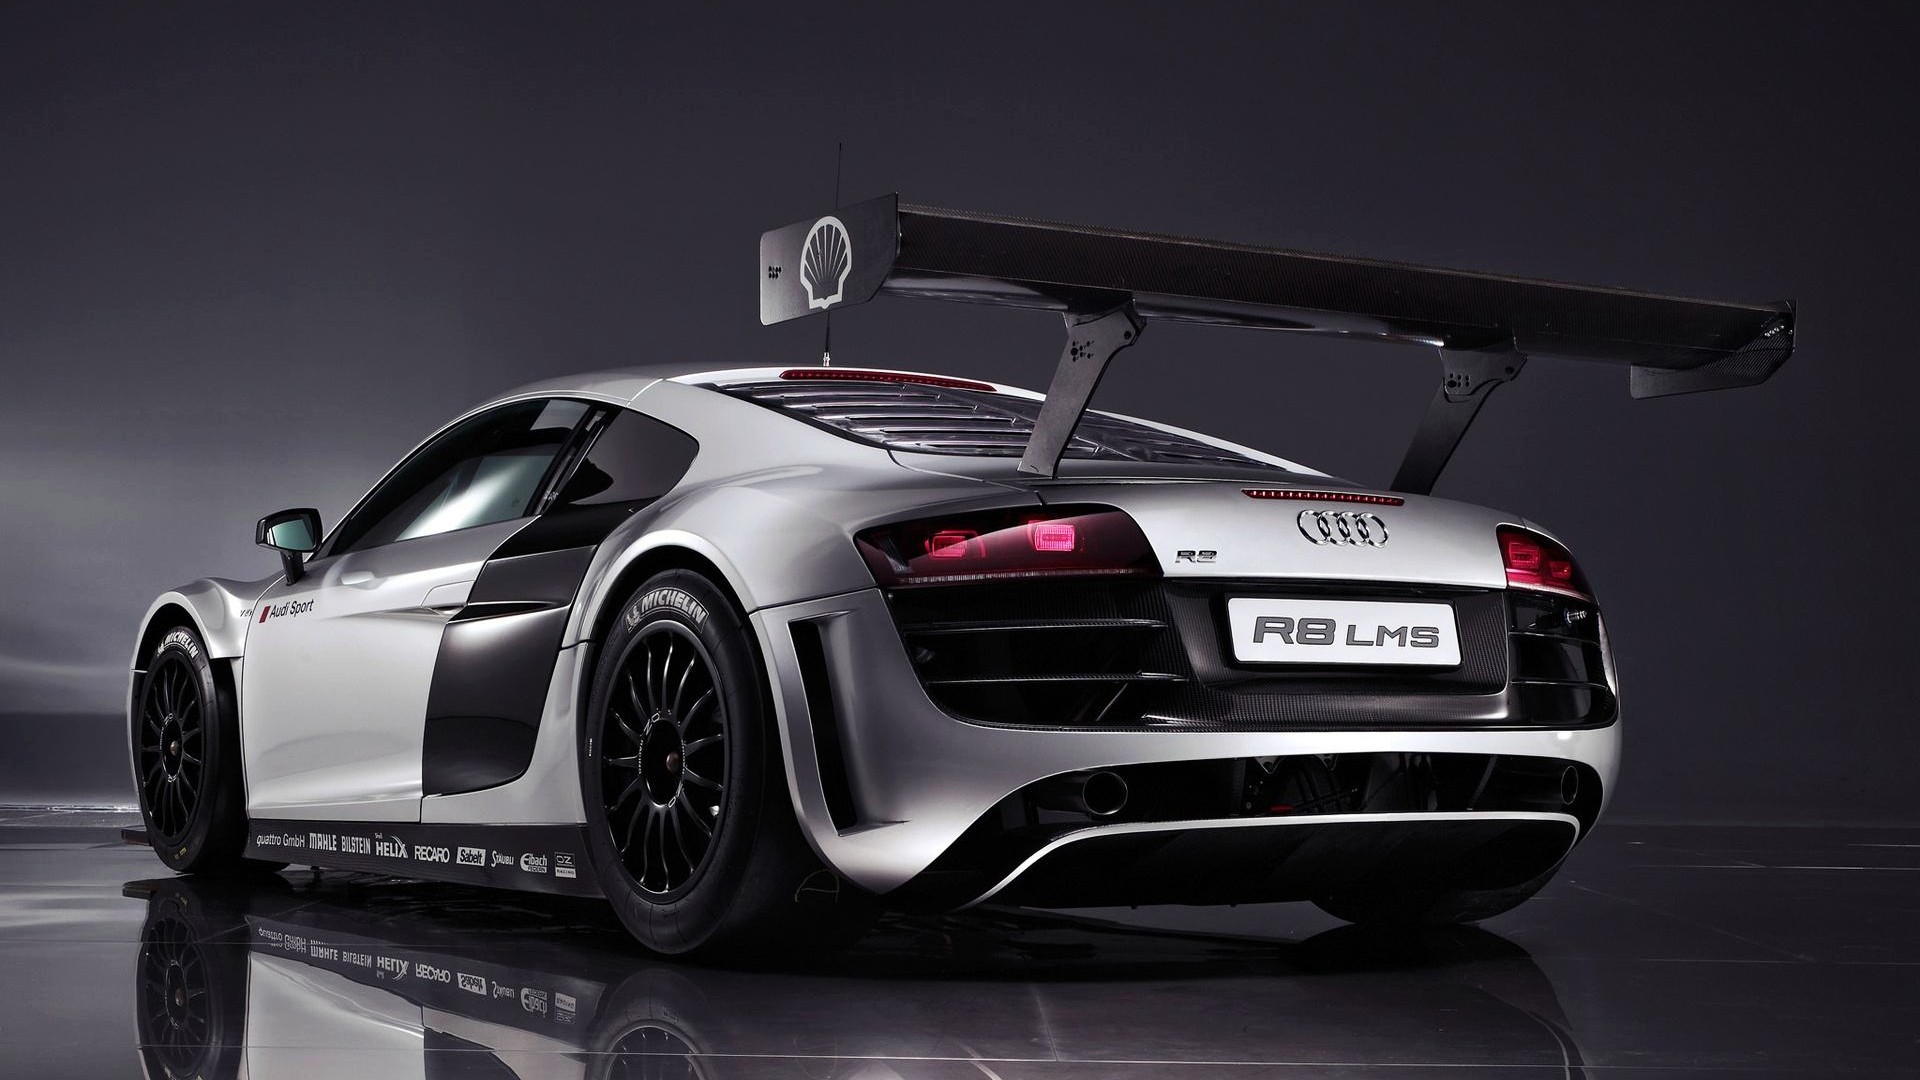 Audi R8 Photos, Download The BEST Free Audi R8 Stock Photos & HD Images